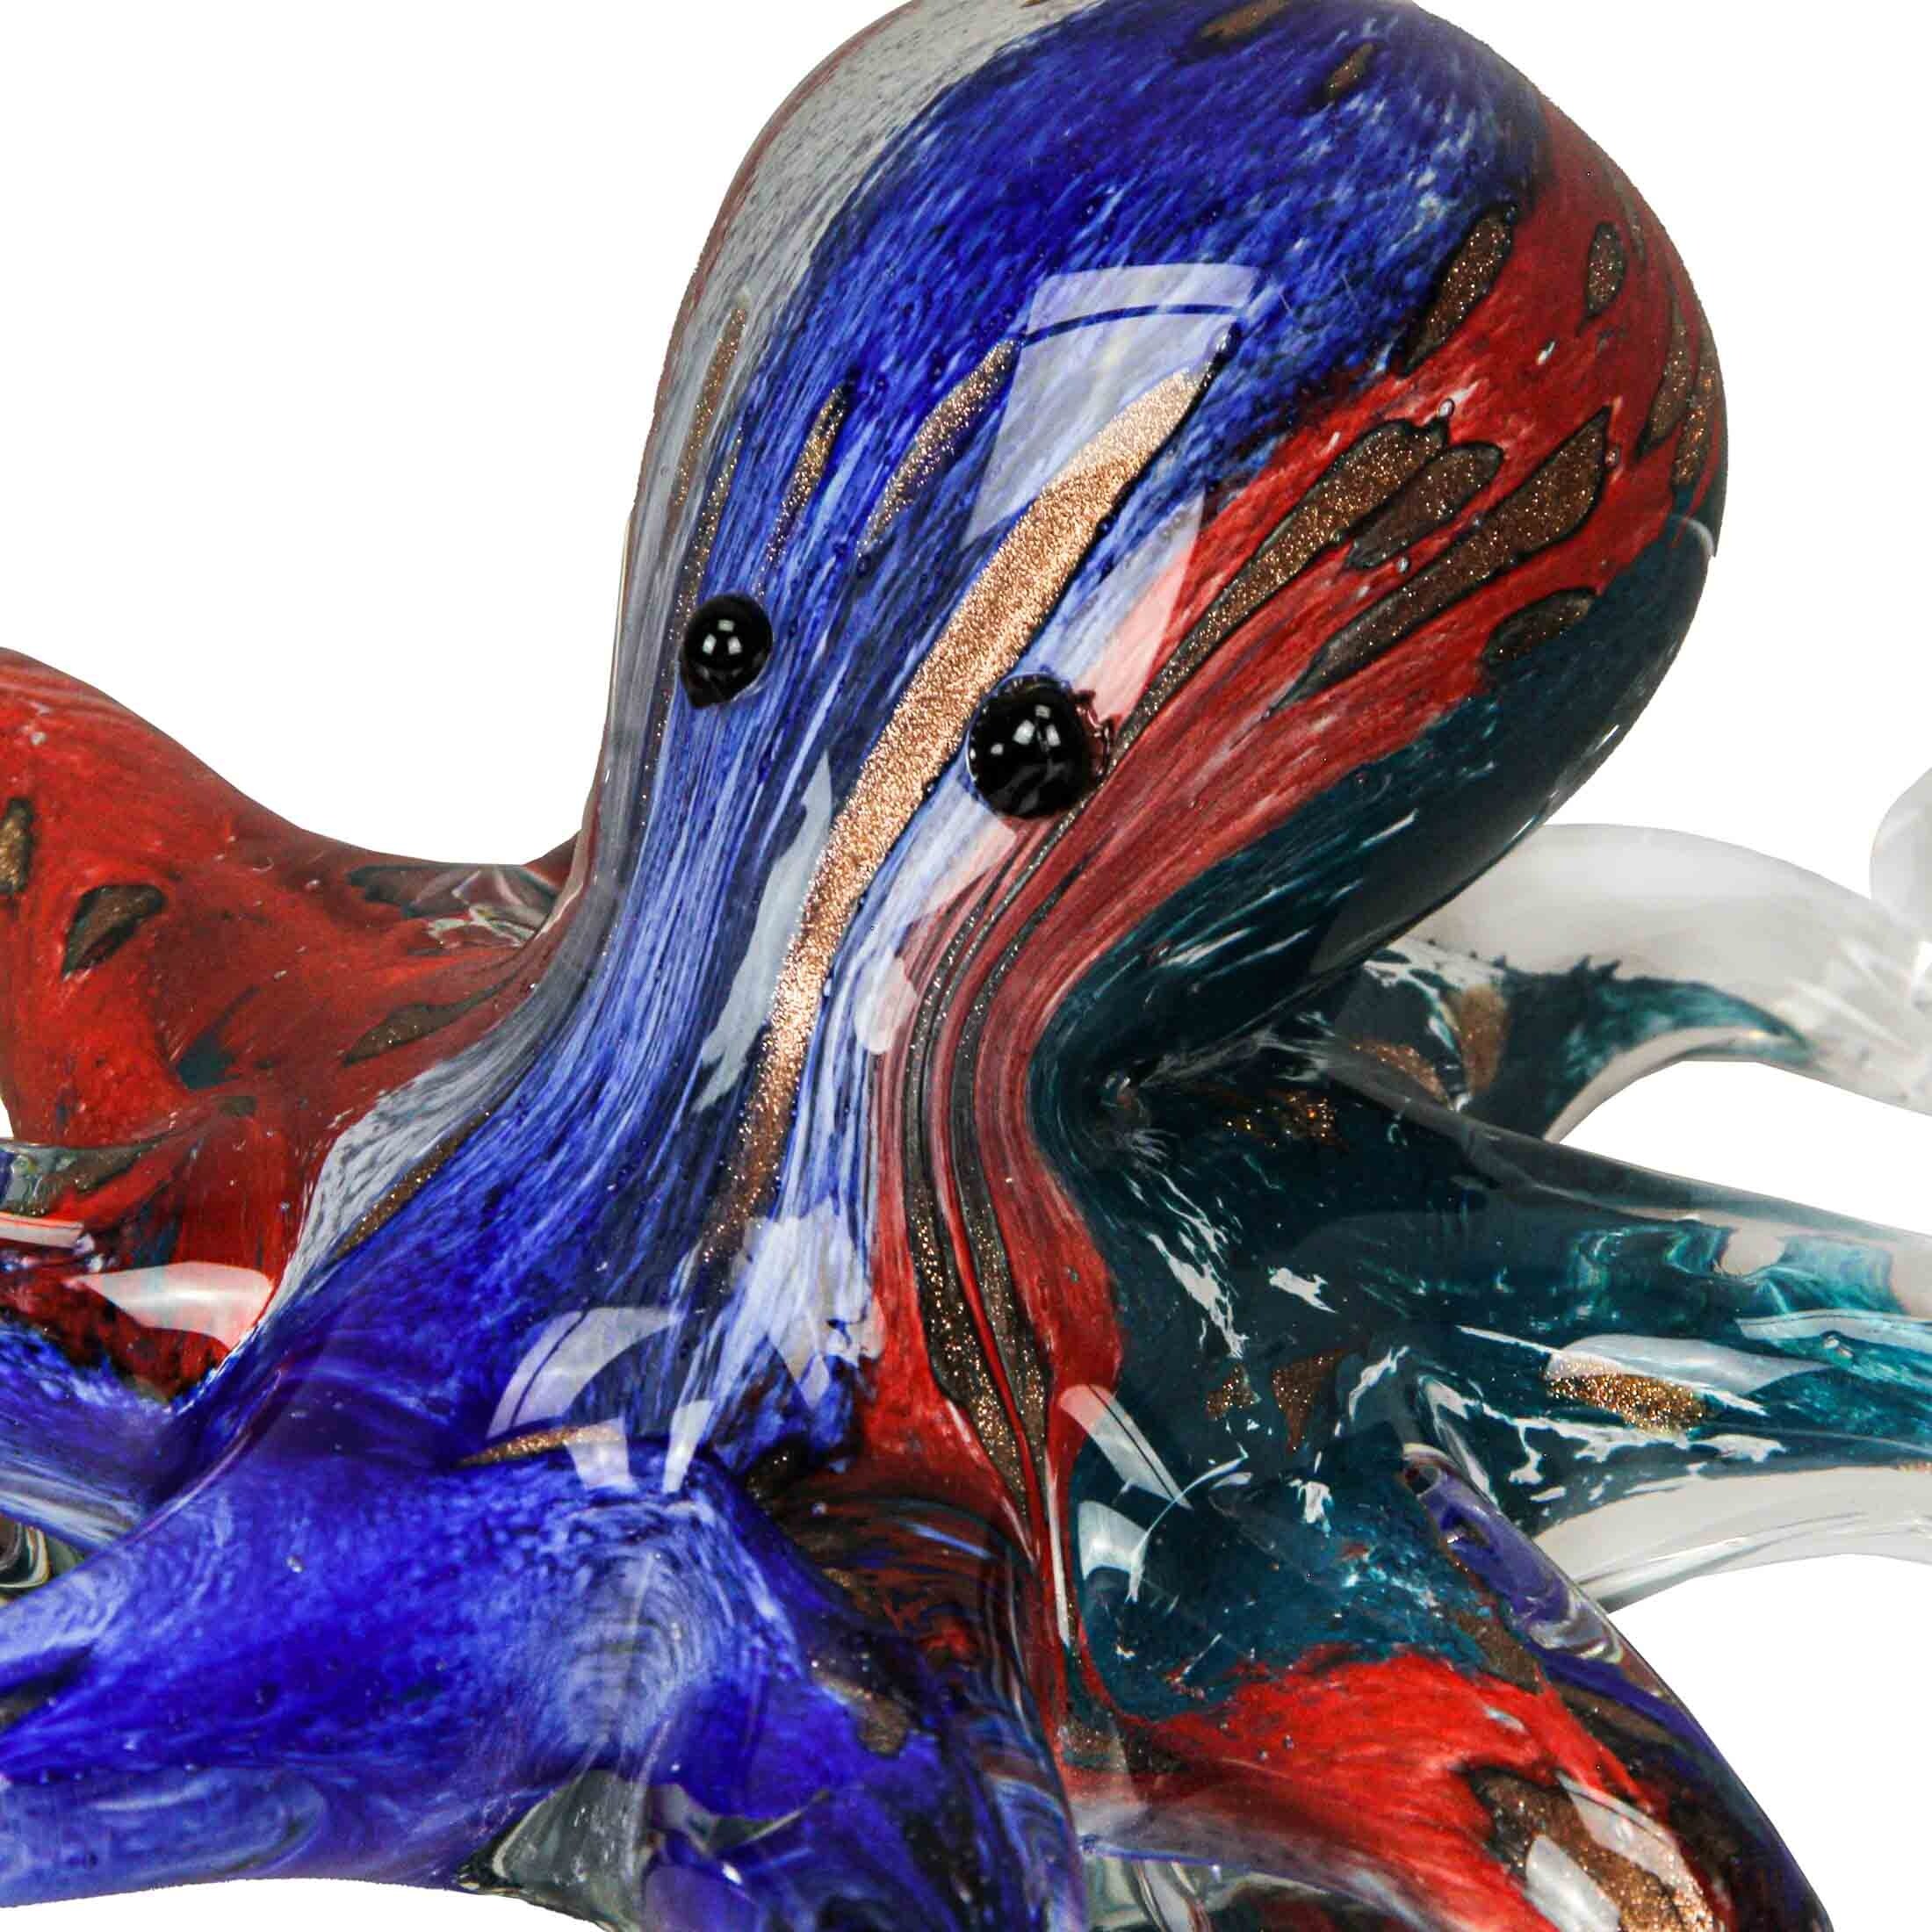 7 Inch Multicolor Blown Glass Octopus Paperweight Figurine Sculpture - 3 X 7.5 X 7 inches